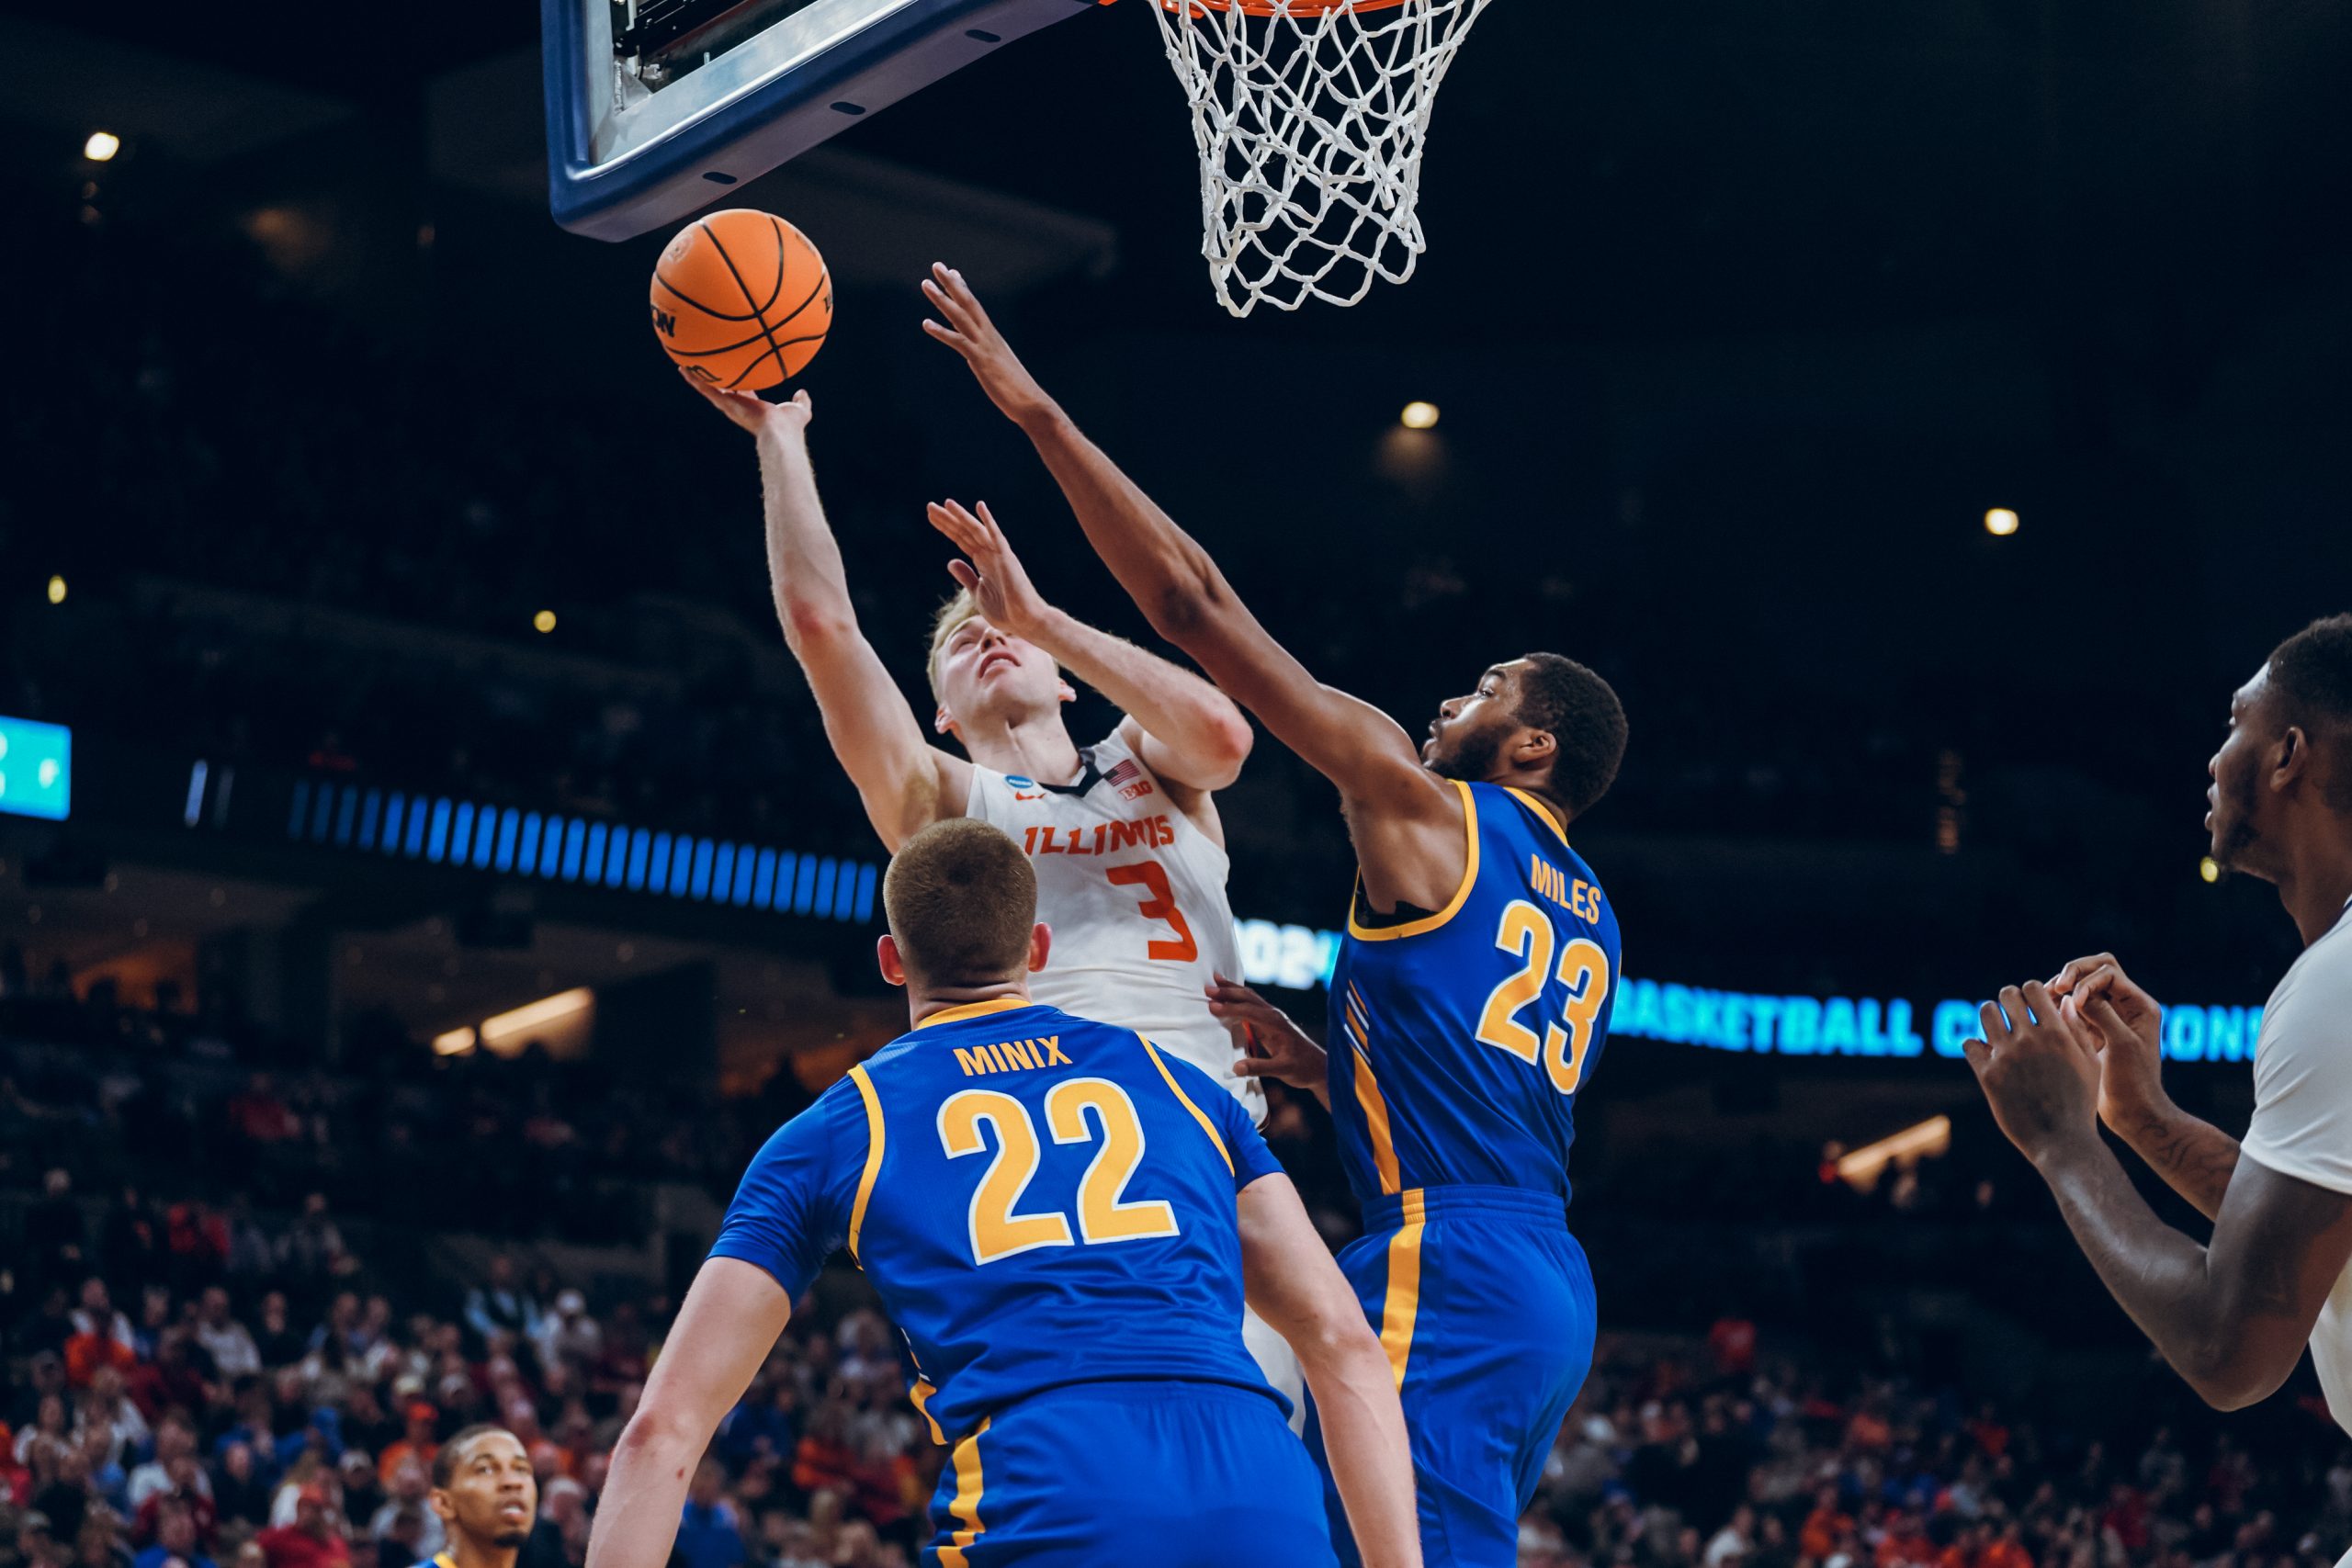 Domask Leads Record-Setting Effort As Illini Rout Morehead State in NCAA Opener